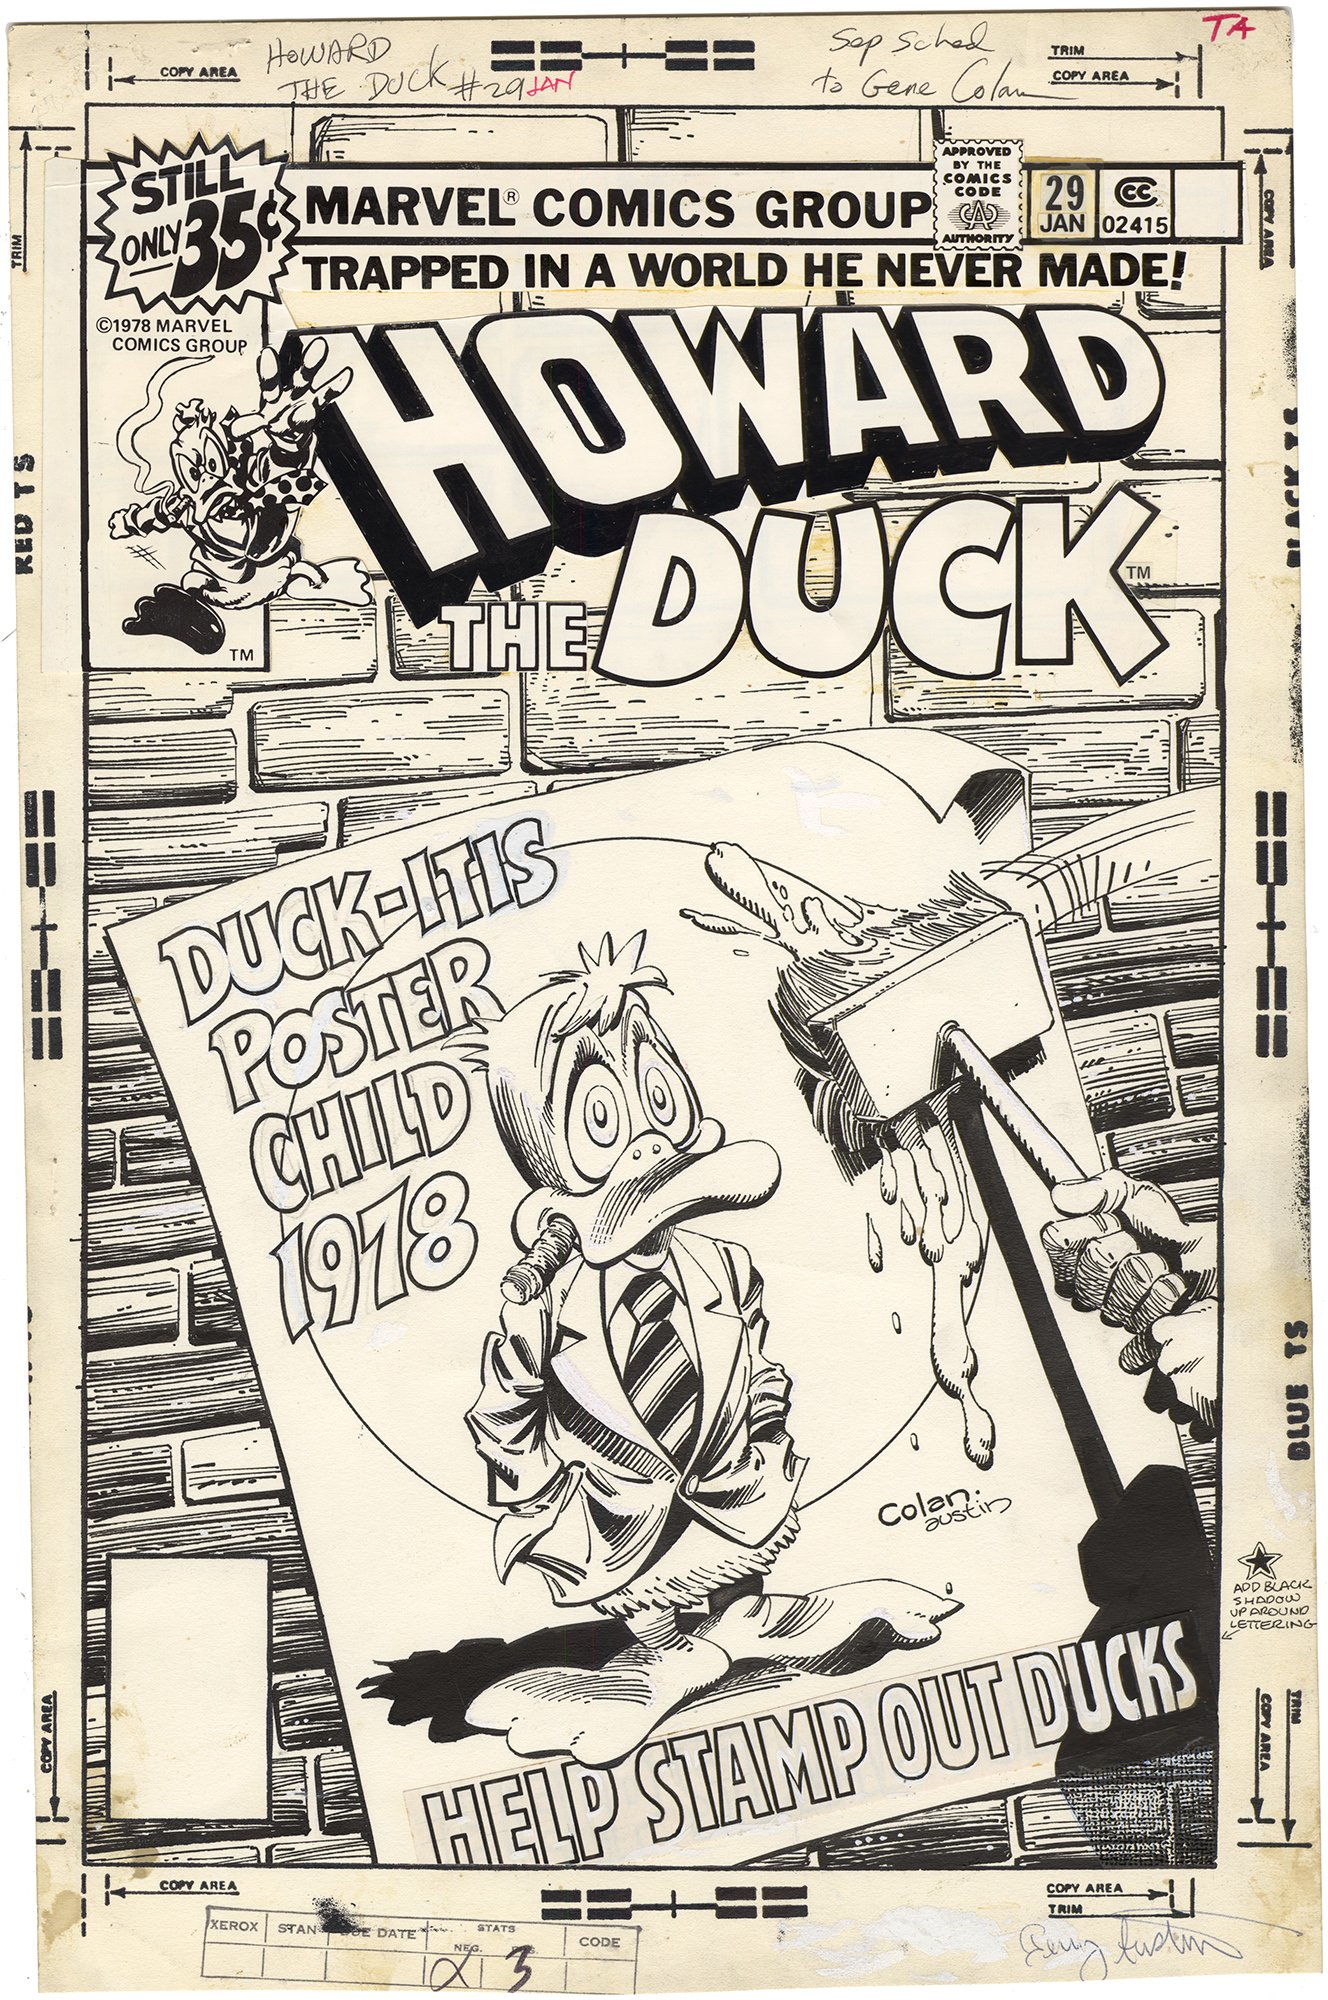 Howard the Duck #29 Cover (Signed)